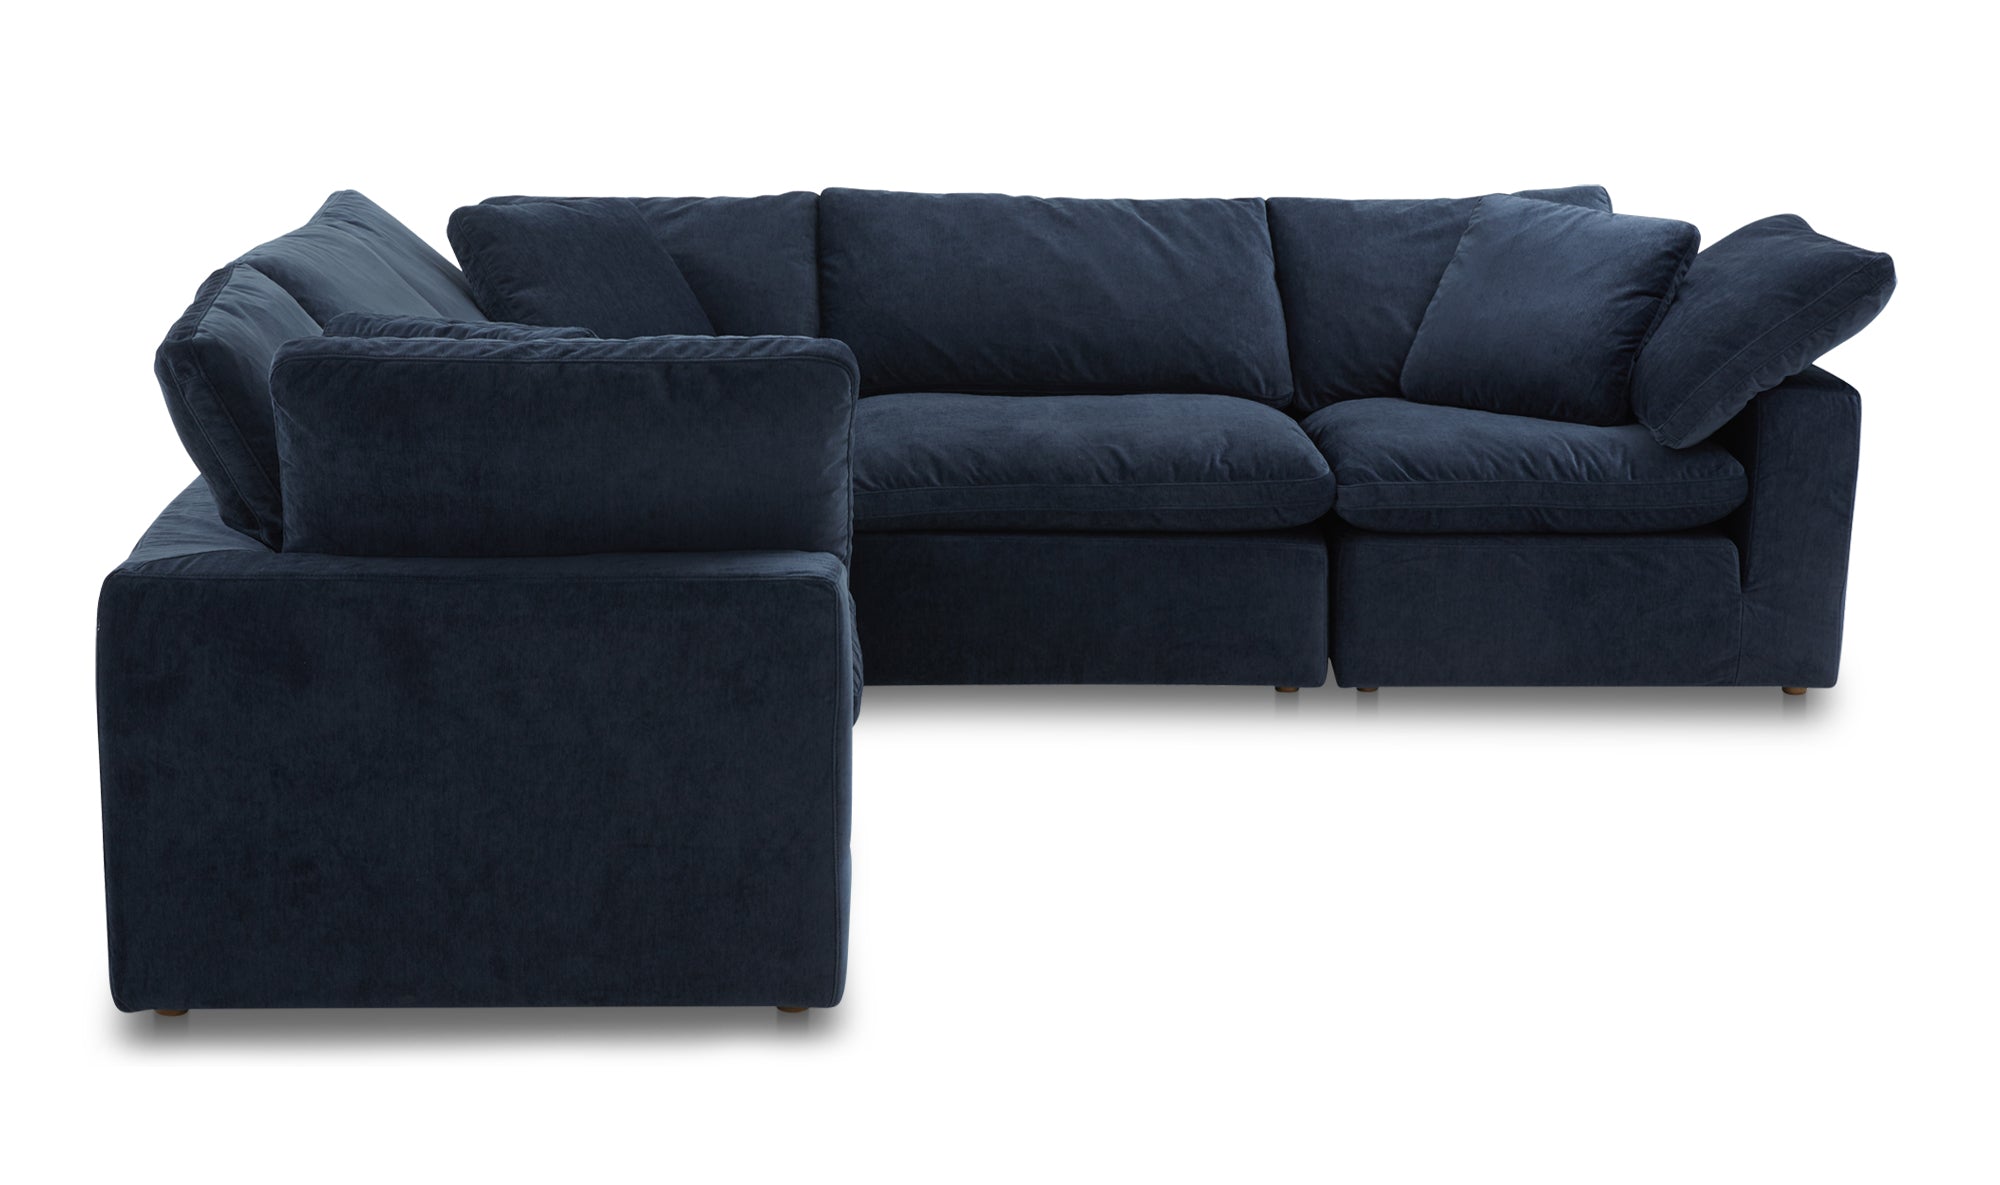 Terra Classic L Modular Sectional Performance Fabric - Nocturnal Sky